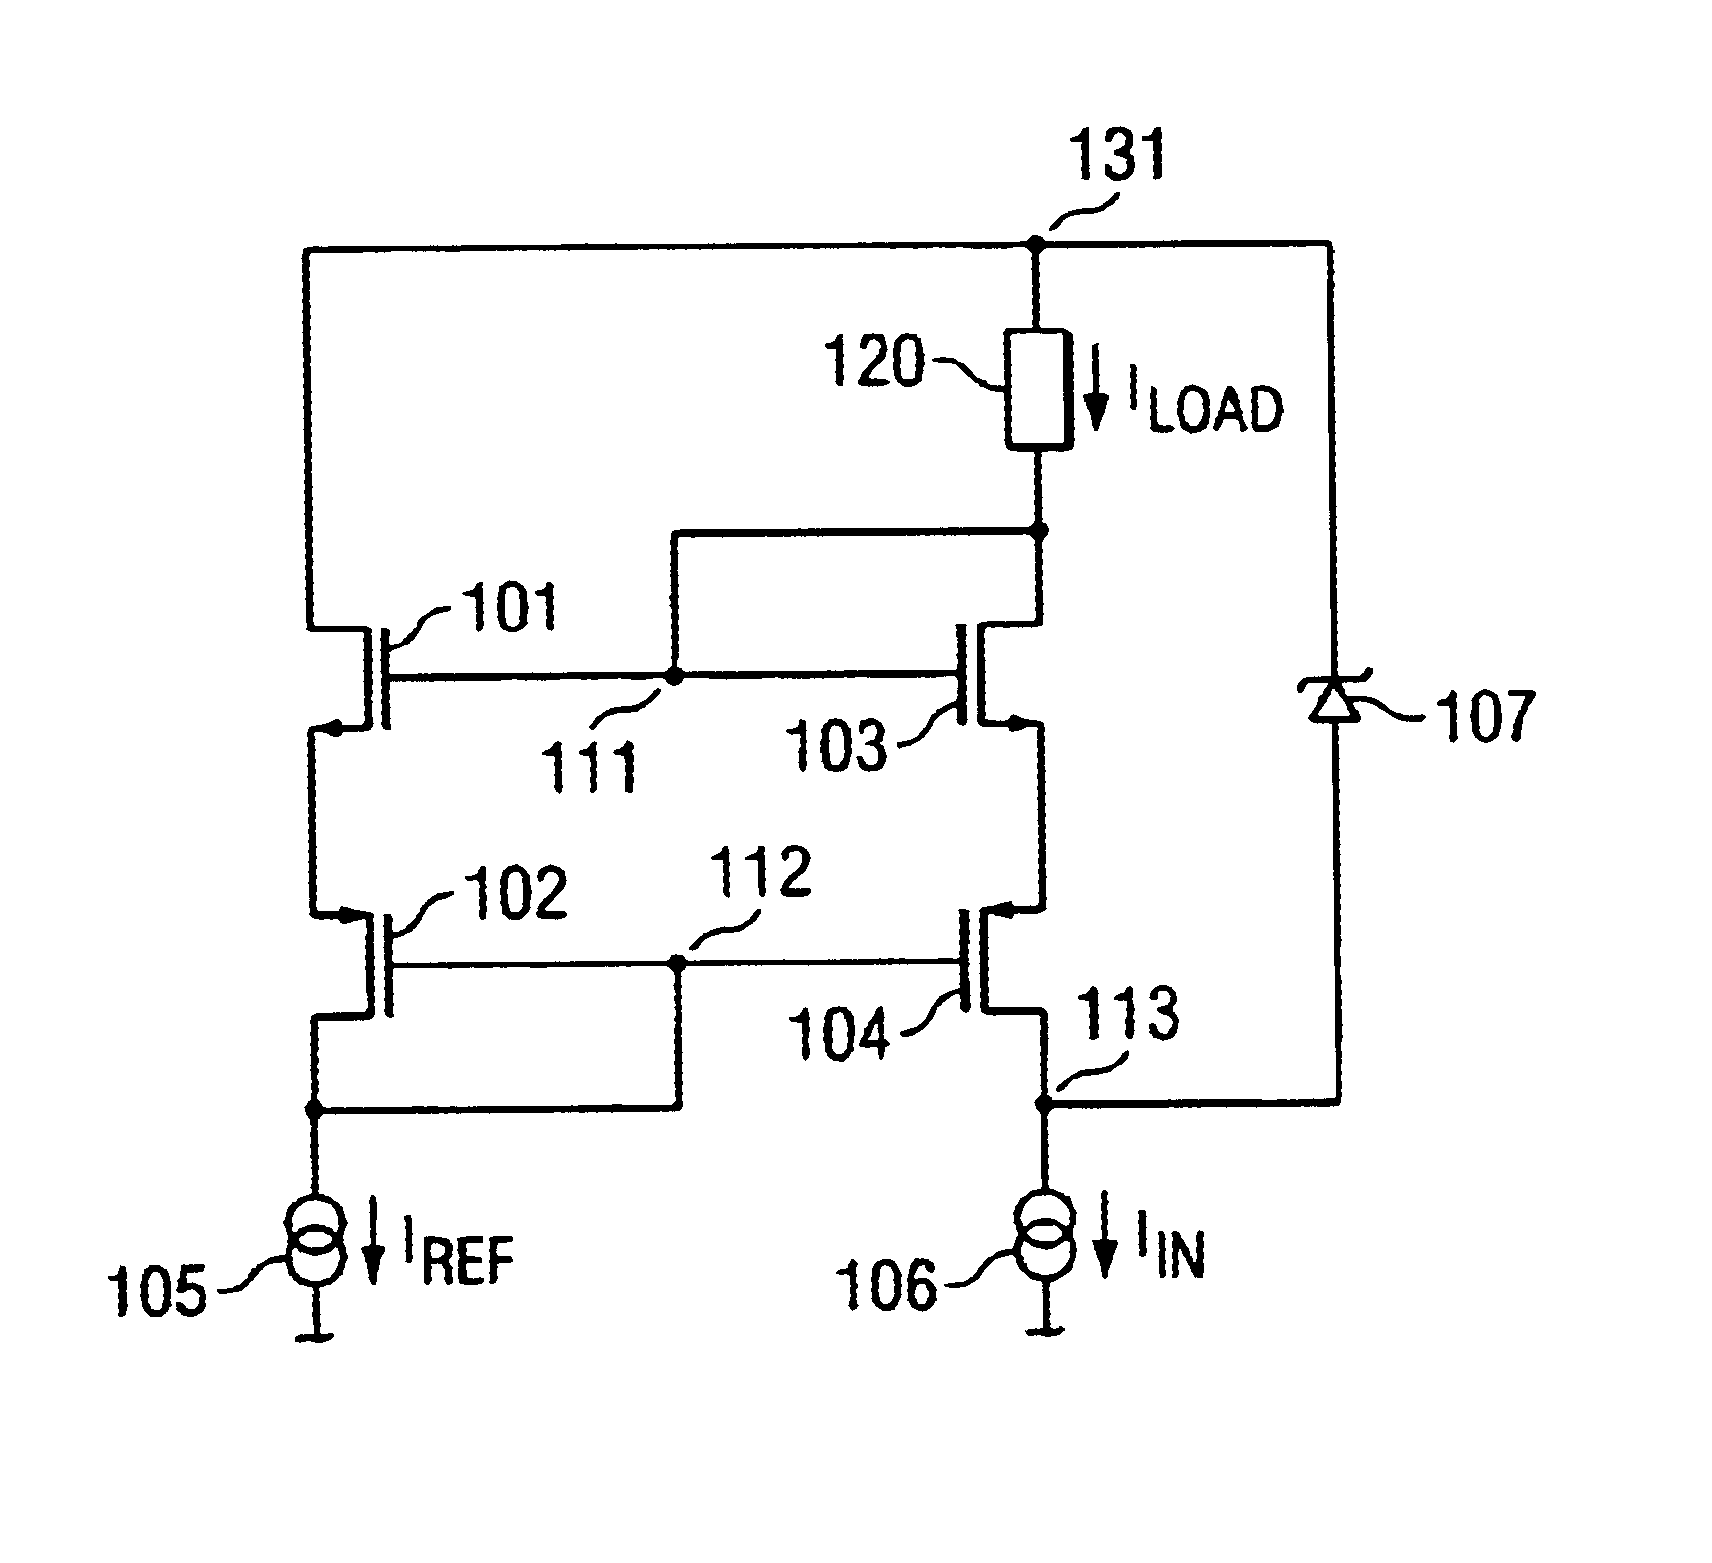 Current-mode circuit for implementing the minimum function